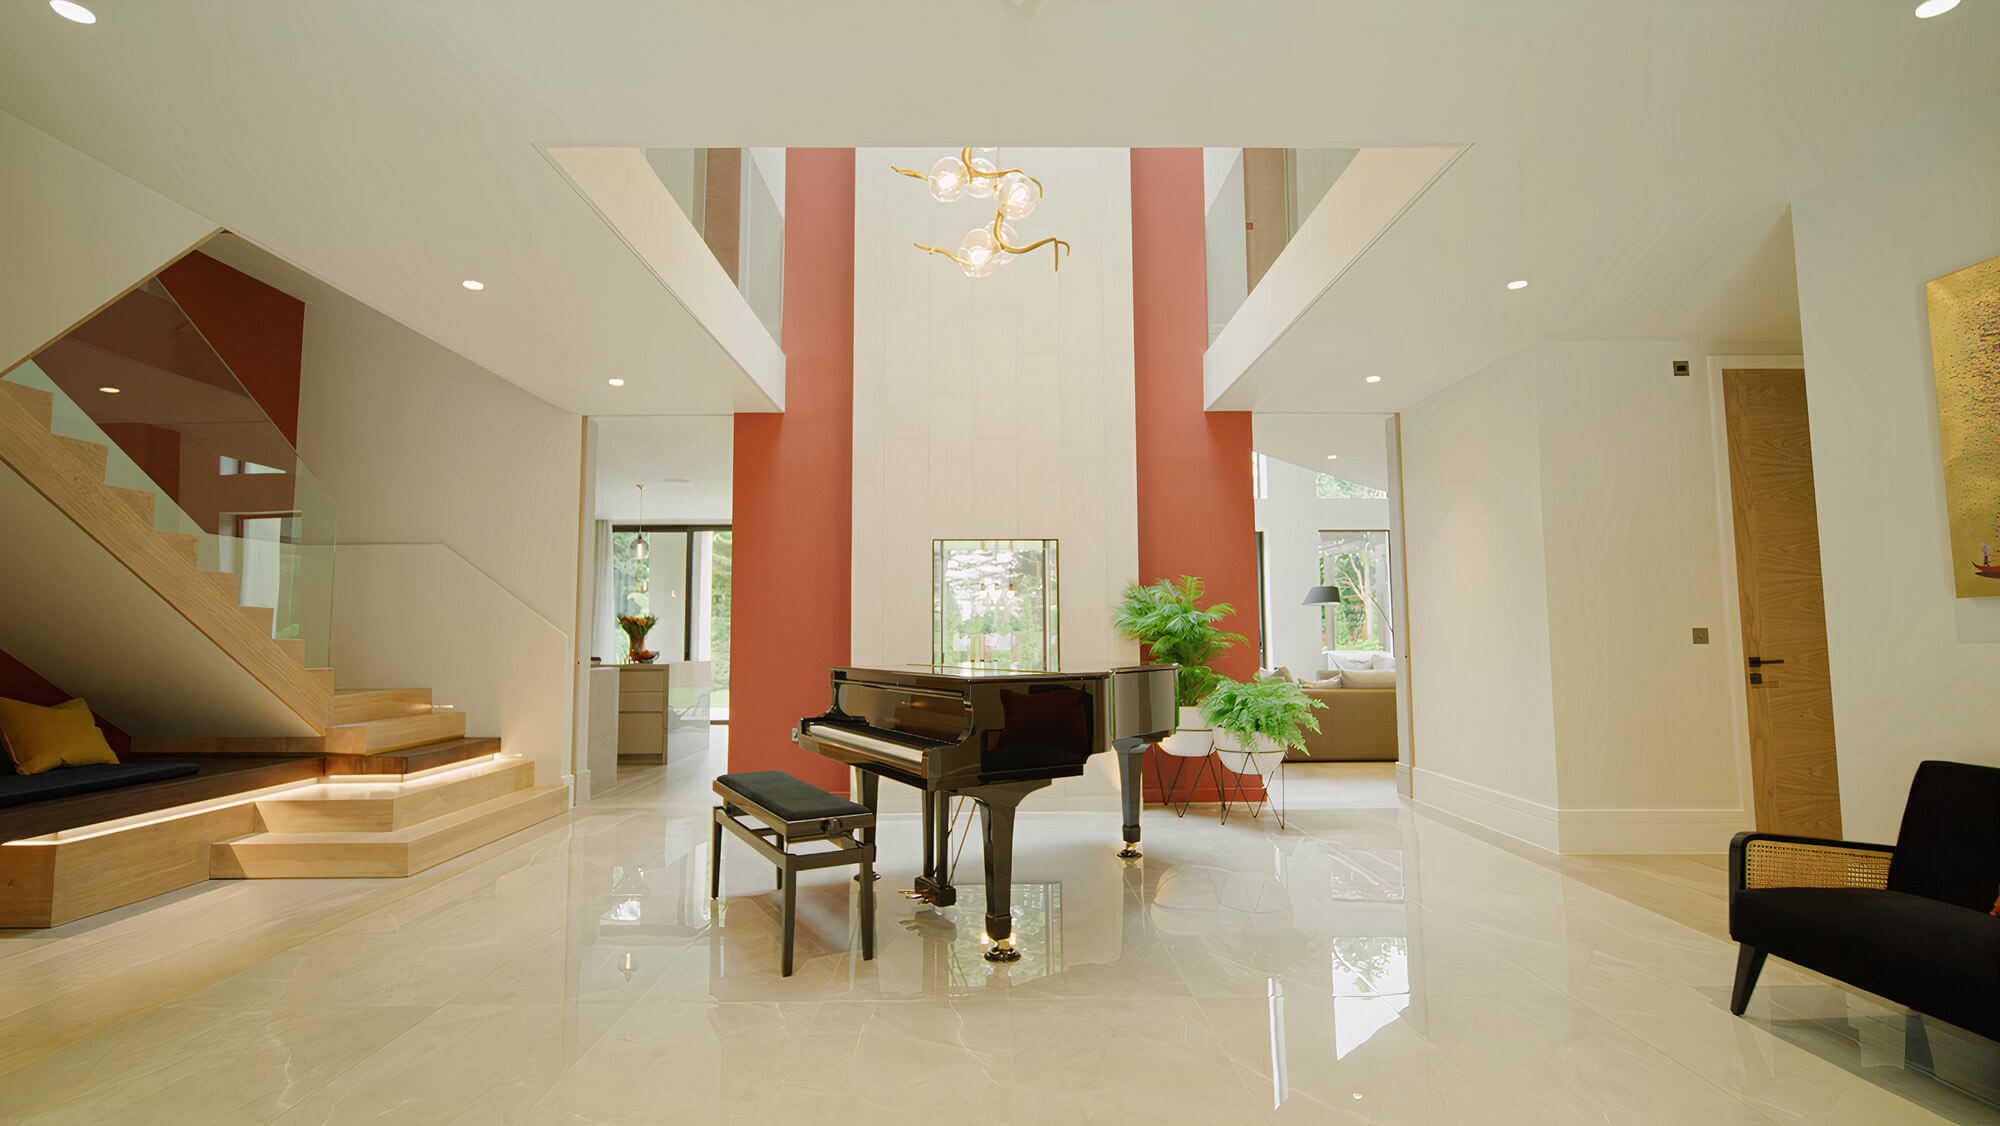 House interior shot of a large reception room including a piano from the Concept 8 fly-through video, from the Rise Media case studies archive